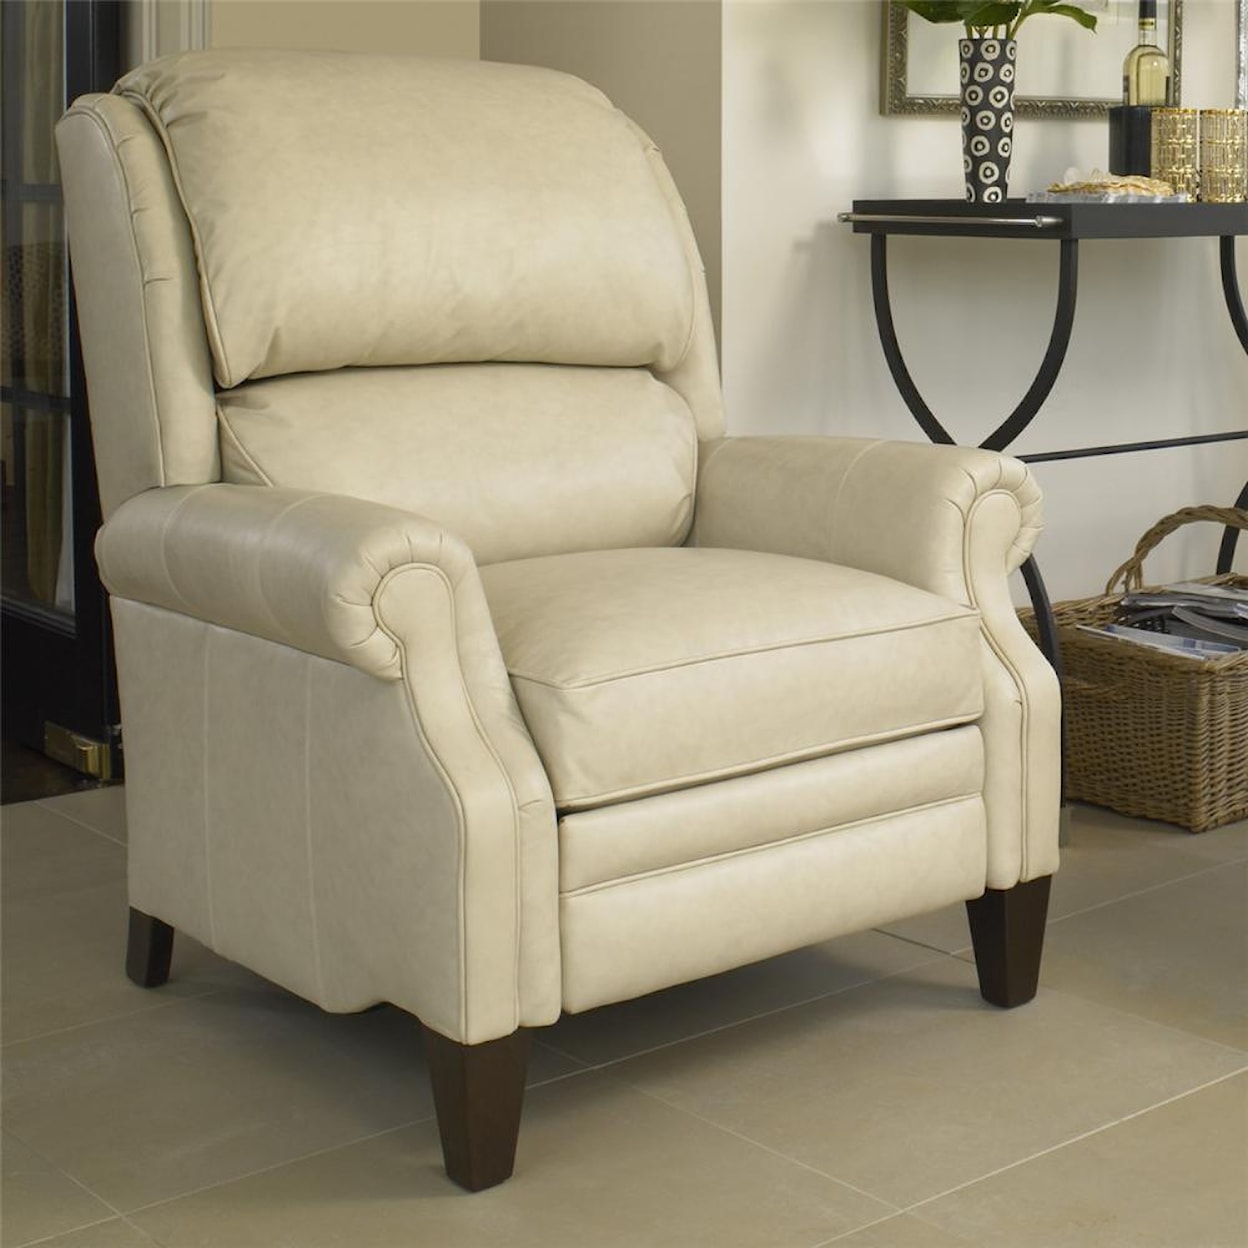 Smith Brothers Recliners  Power Recliner